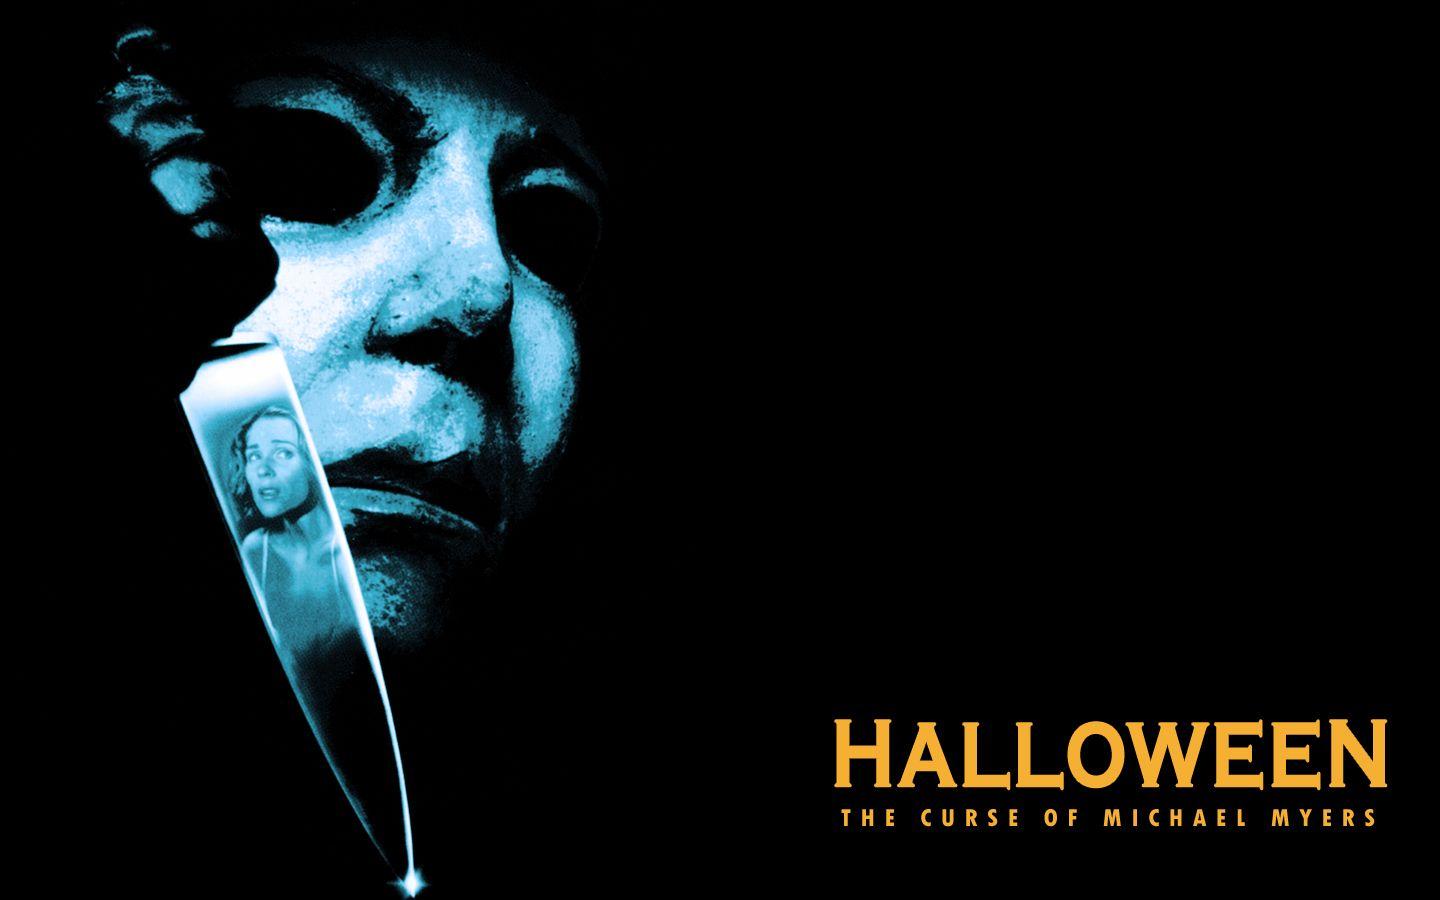 90s Horror image Curse of Michael Myers HD wallpaper and background